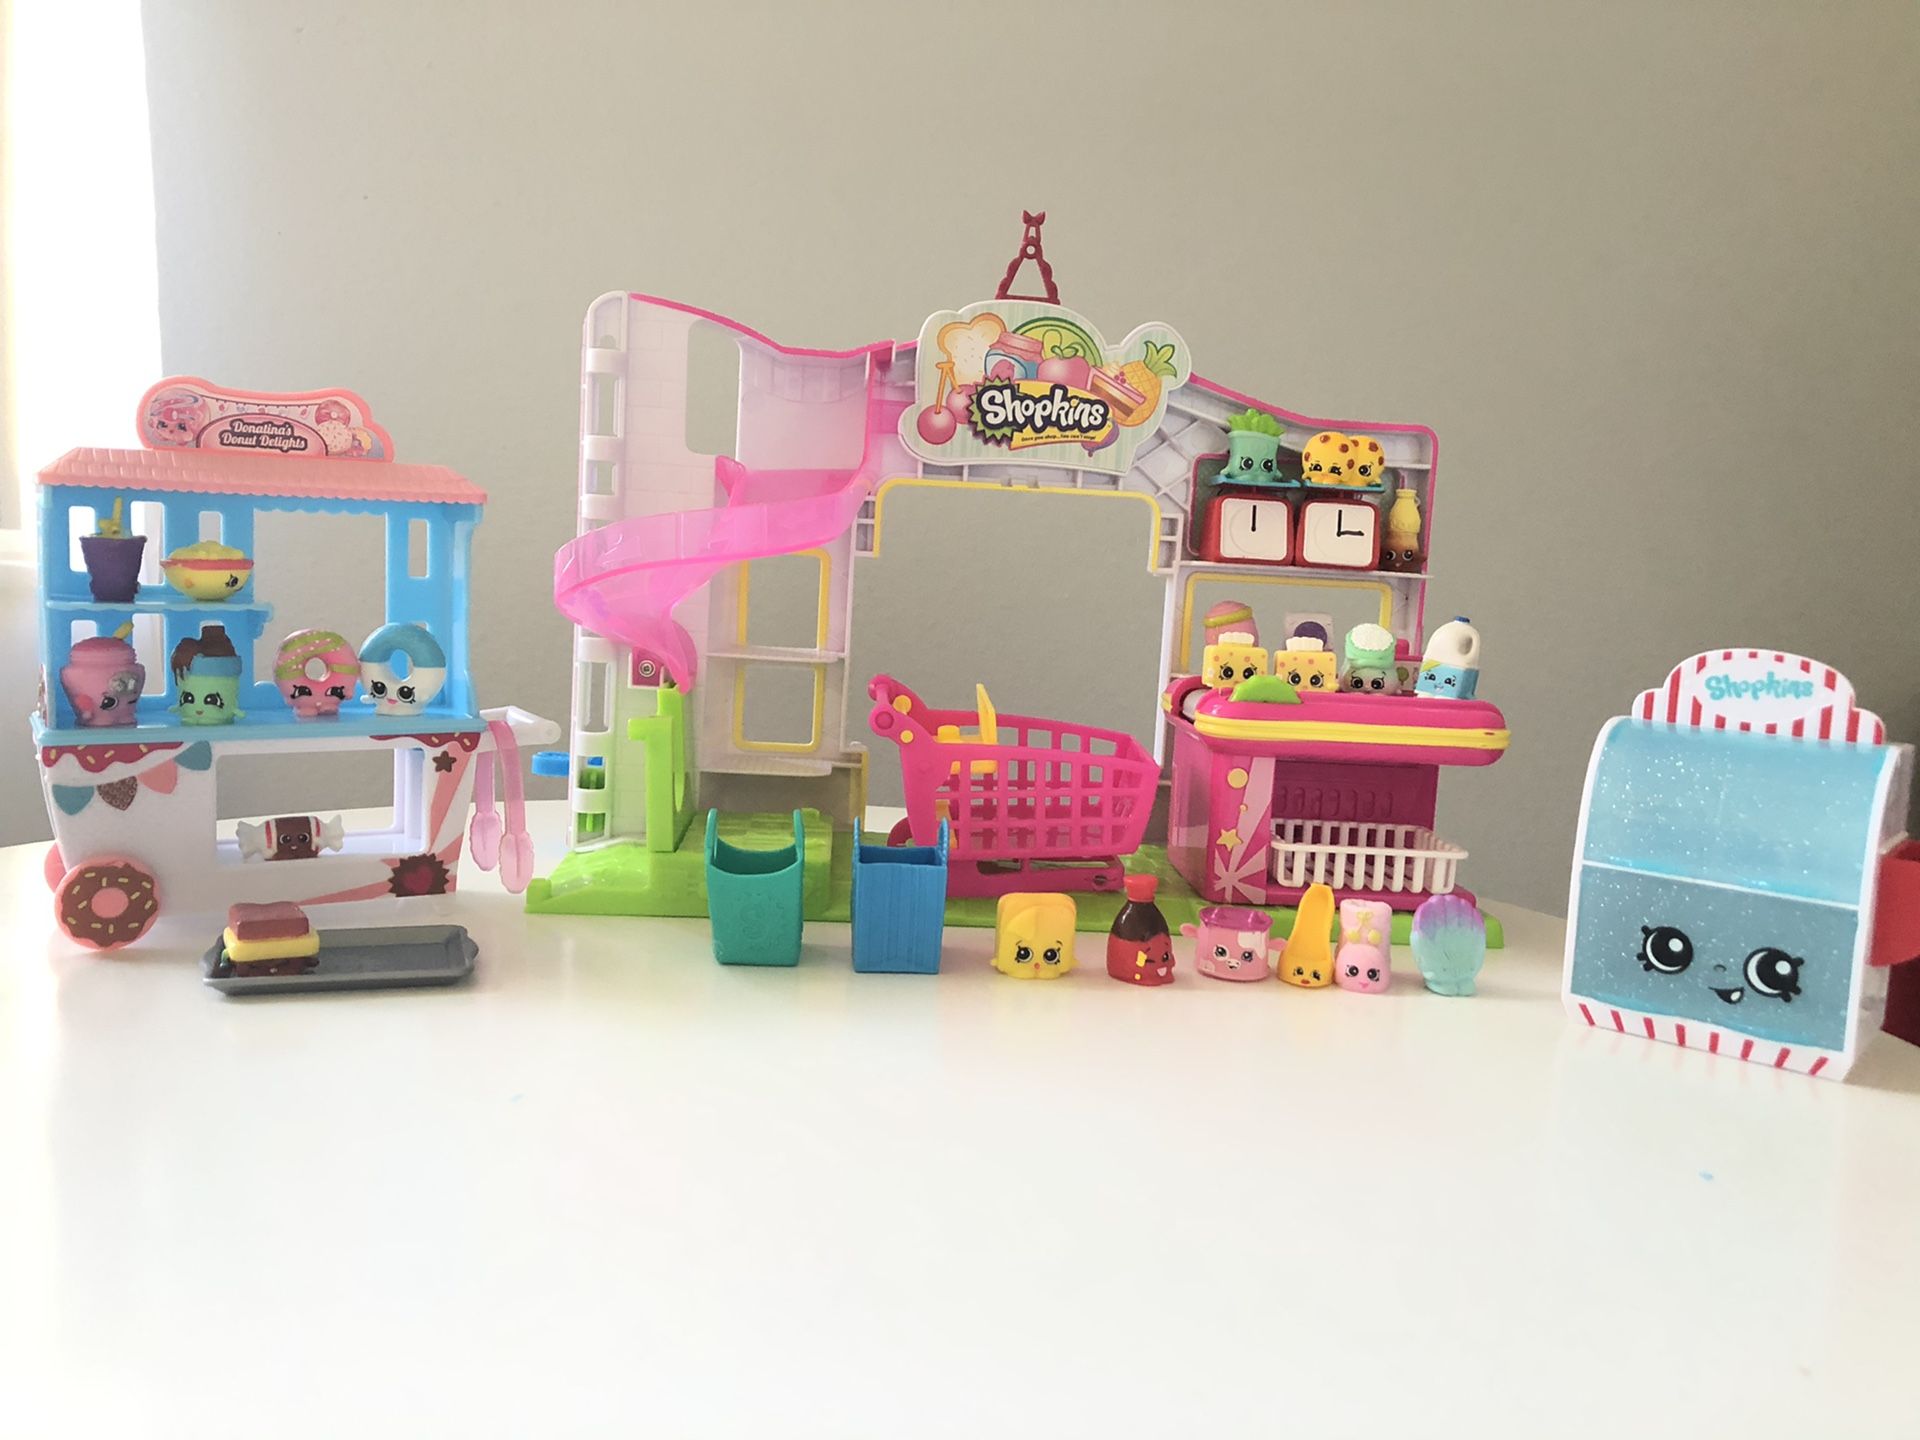 Shopkins play house, shopping store, furniture, collectibles with case, dolls etc